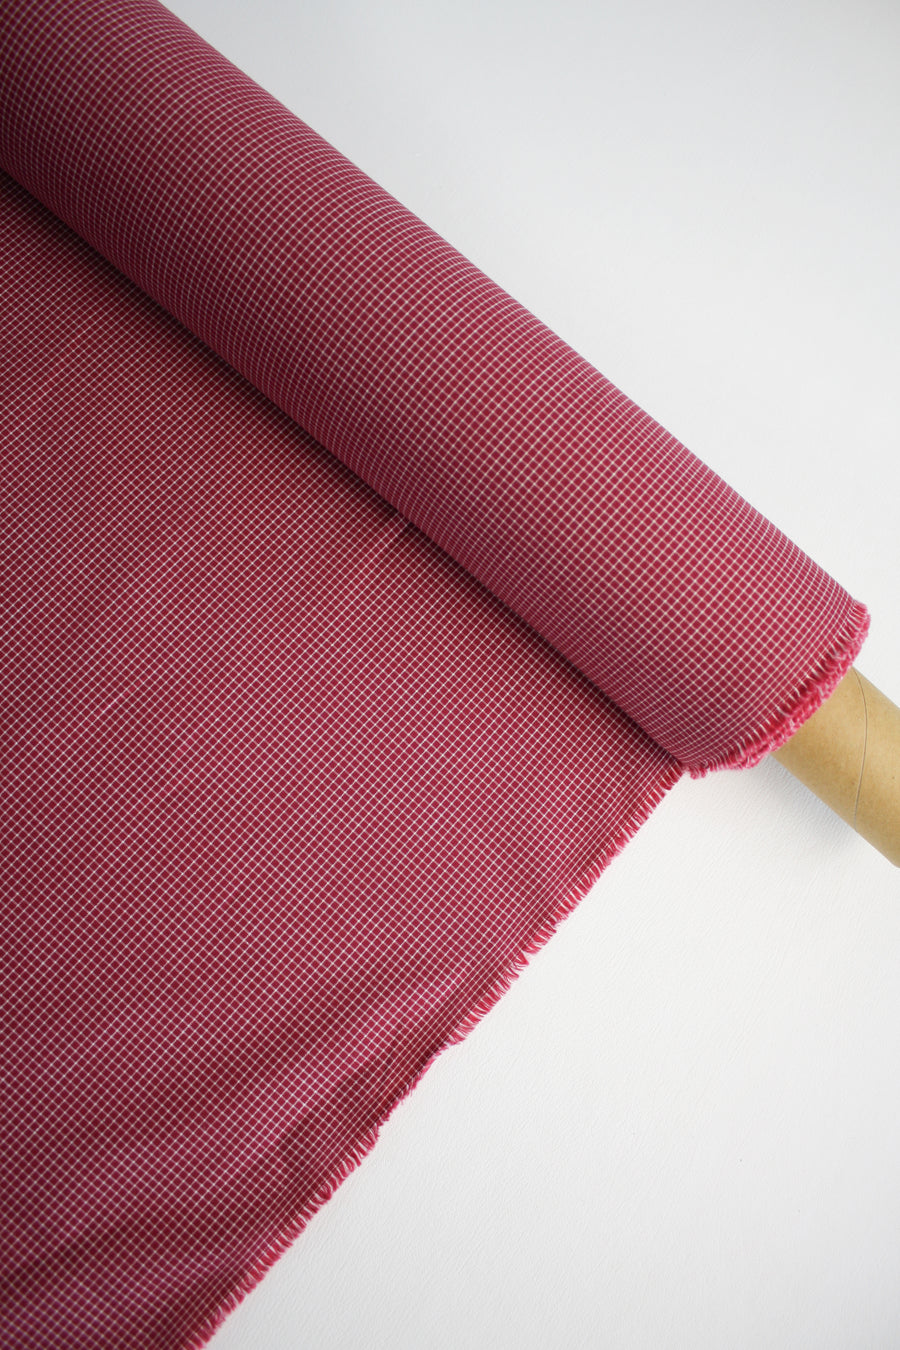 Hitome - Yarn Dyed Cotton | Wine #5